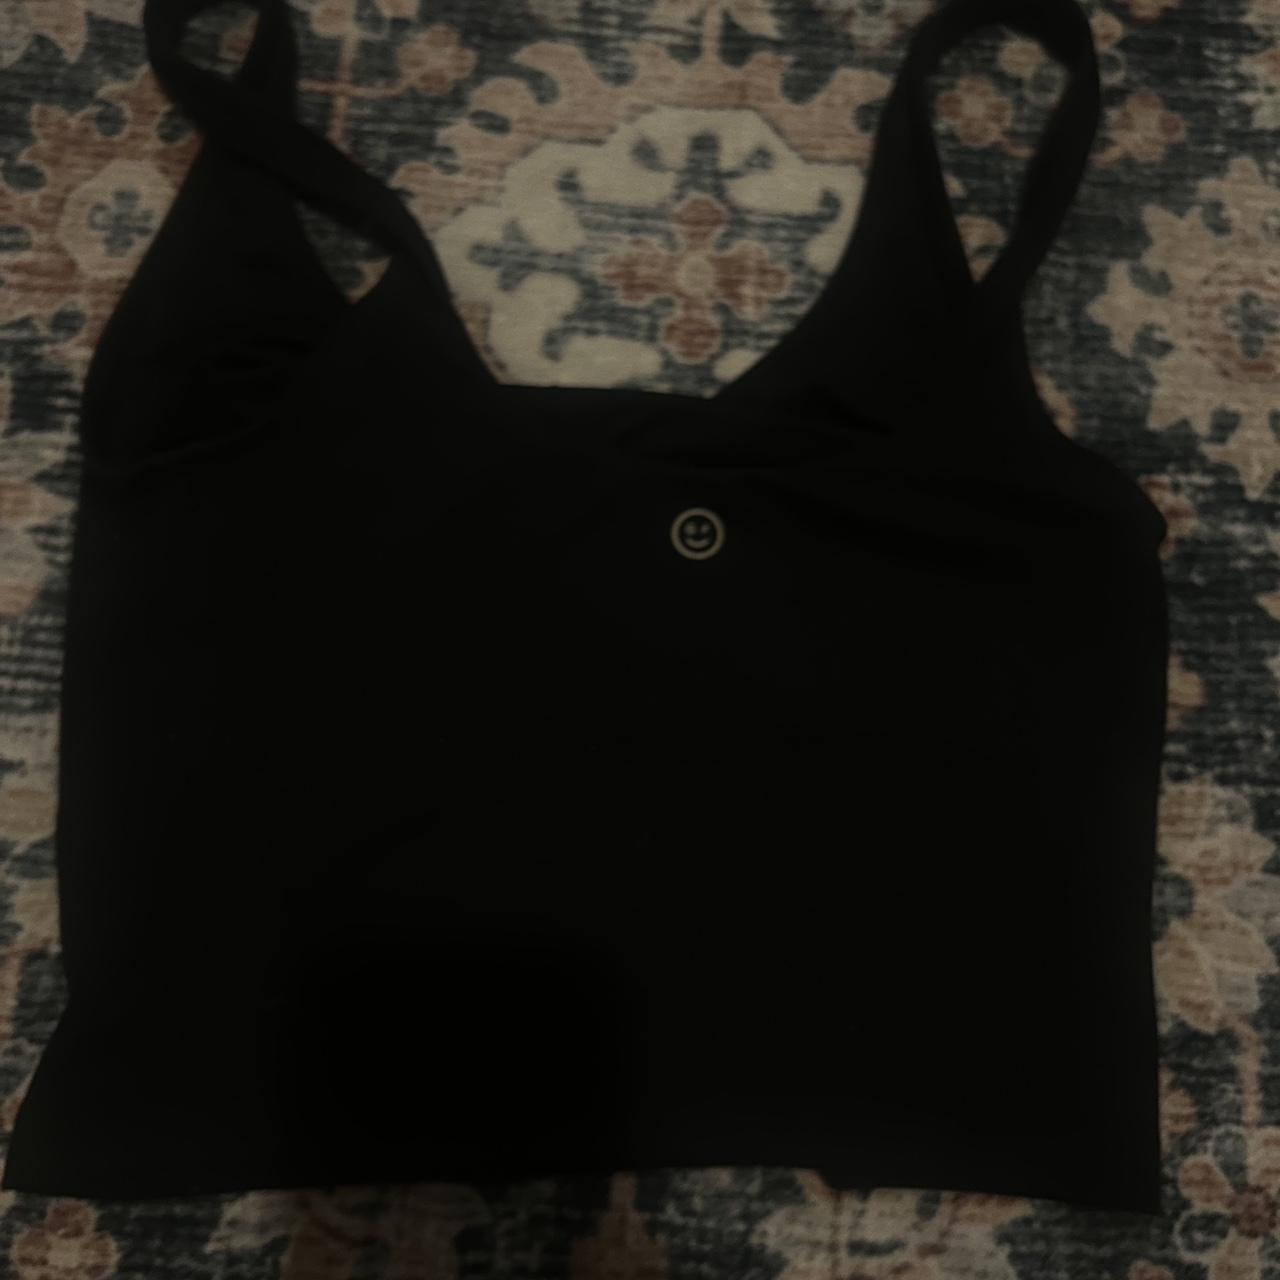 gilly hicks hollister tank size small, #hollister